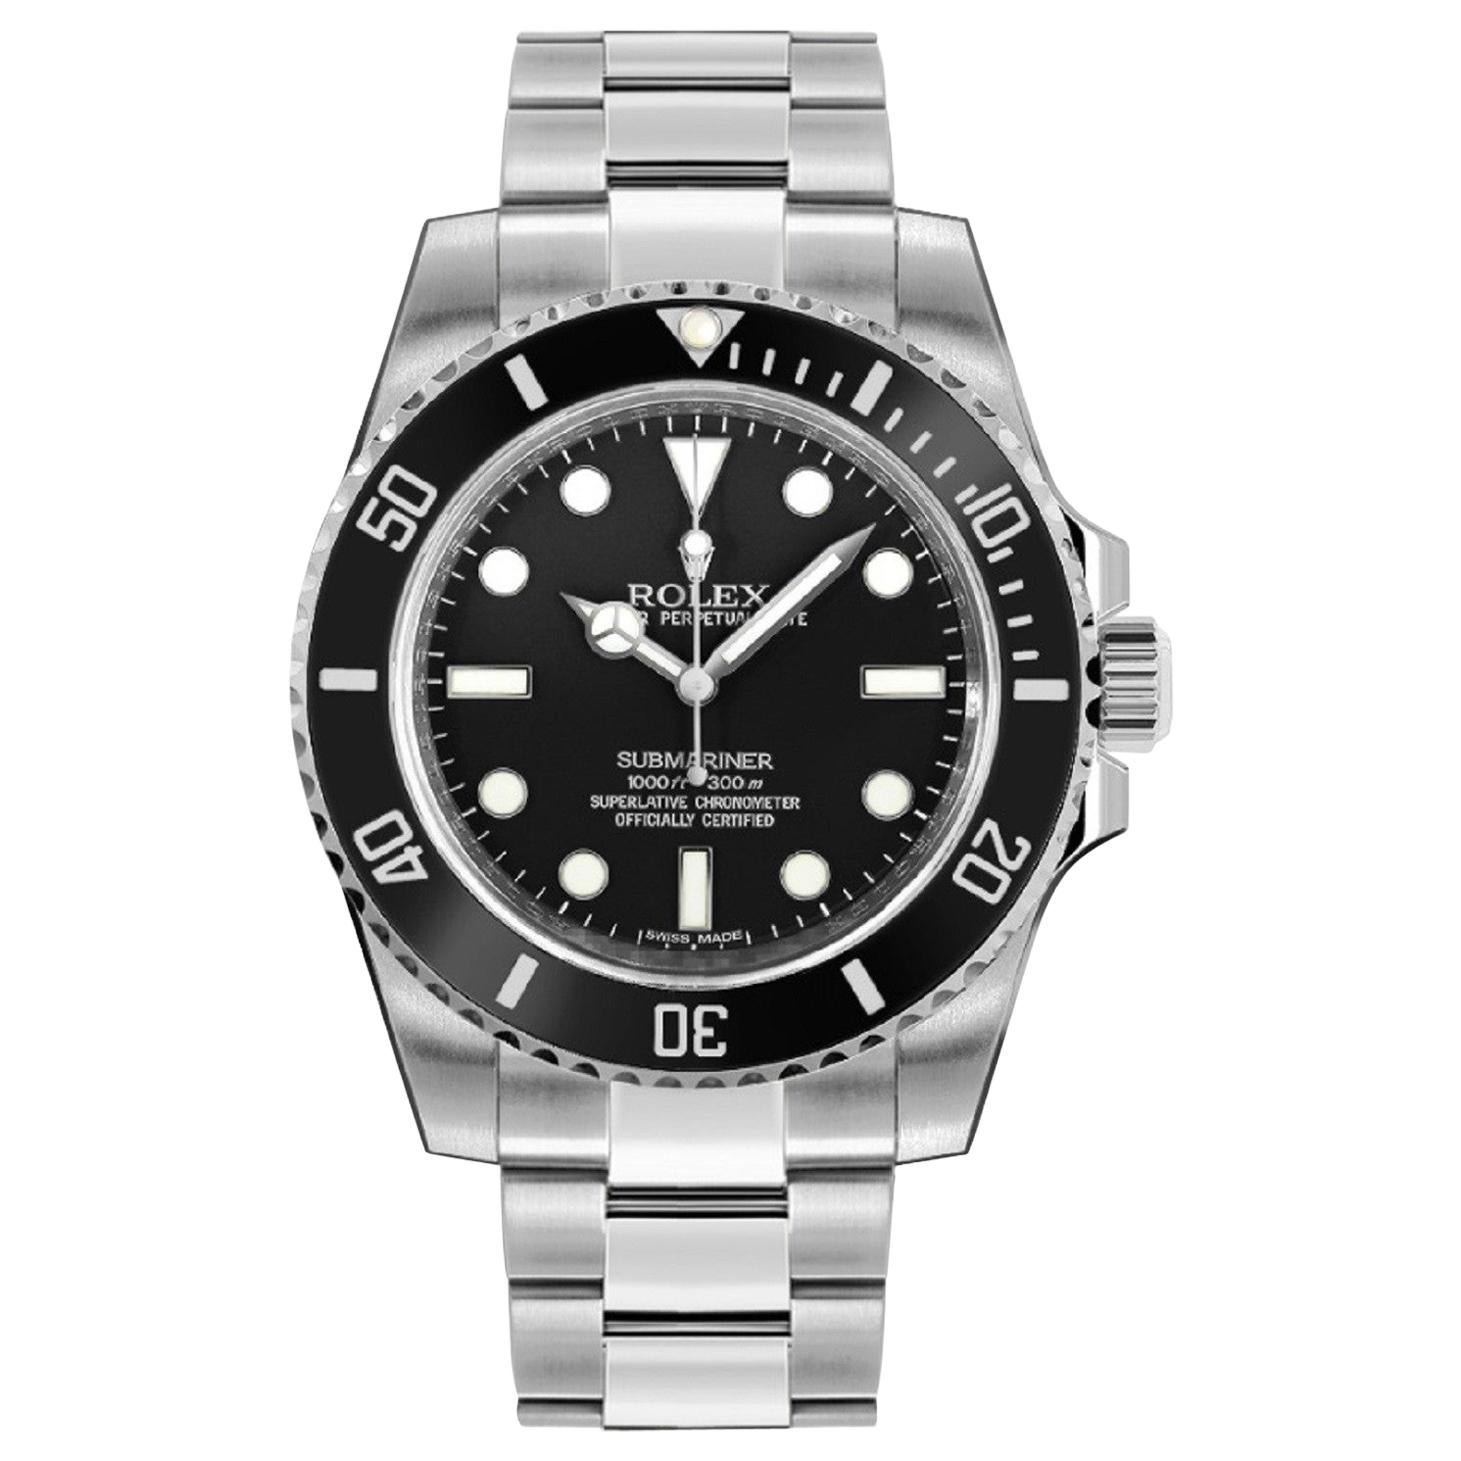 Rolex Submariner 114060 Ceramic New 2020 Automatic Watch Box and Papers